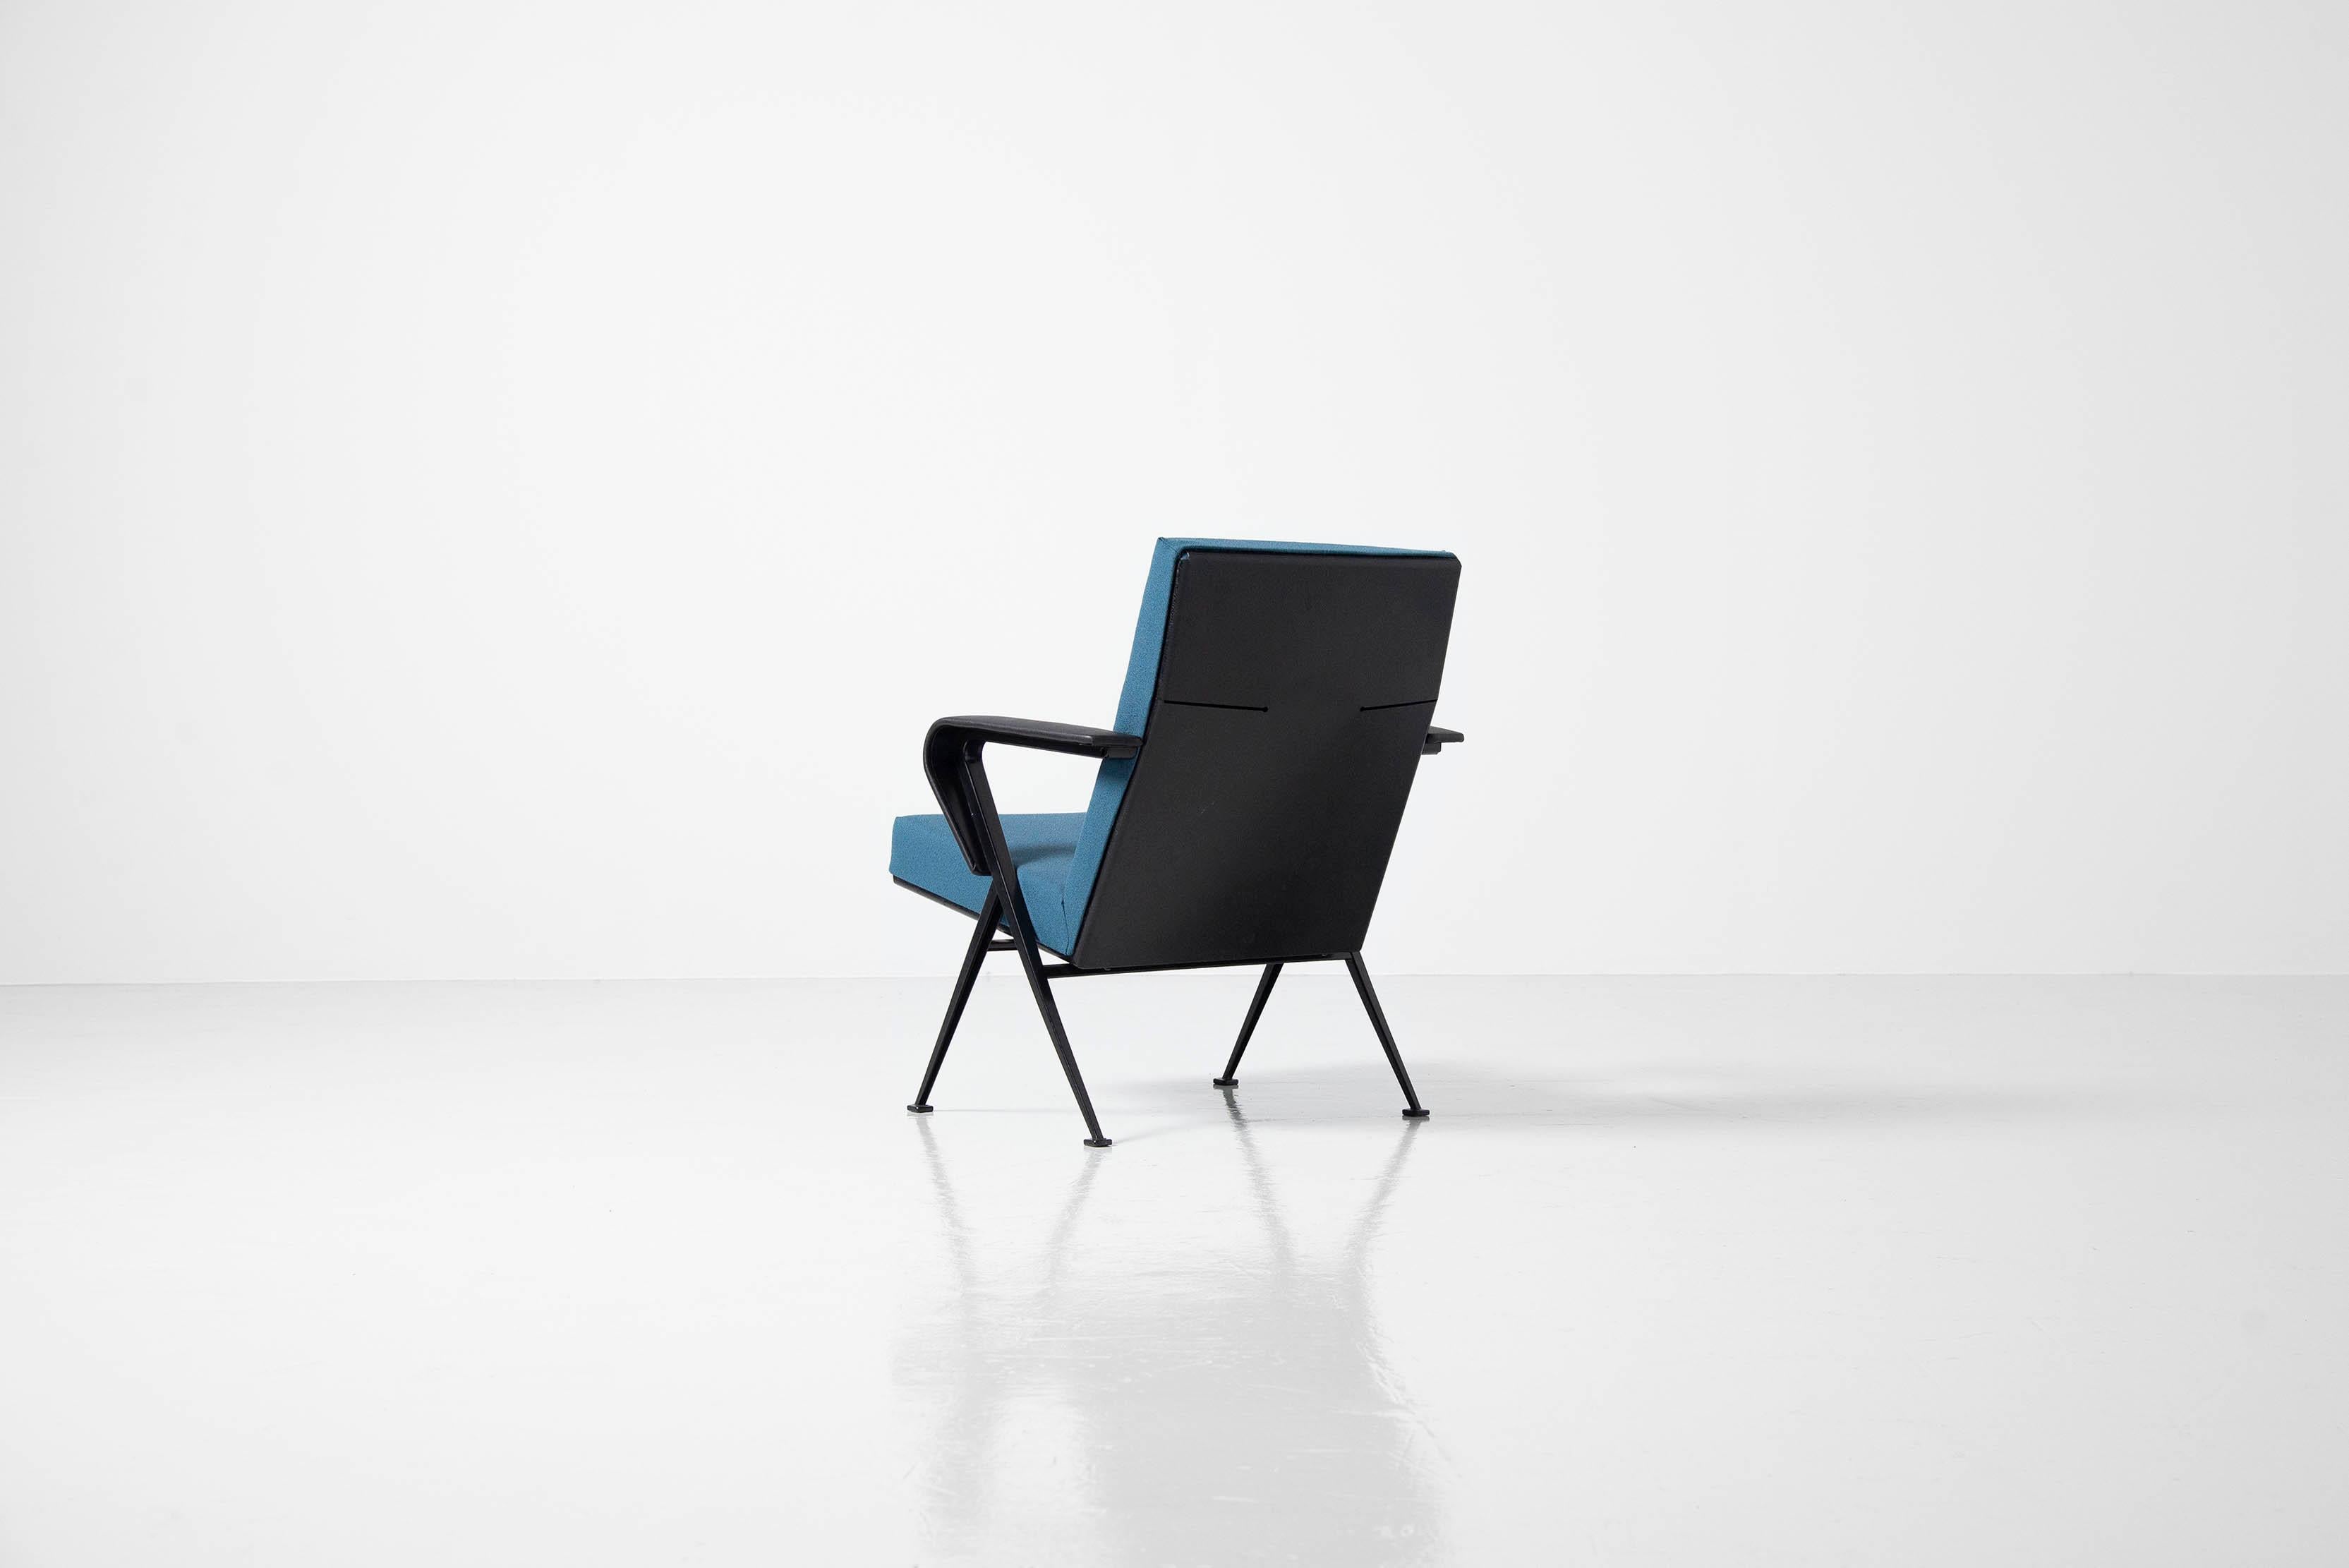 Nice industrial 'Repose' easy chair designed by Friso Kramer and manufactured by Ahrend de Cirkel, Holland 1959. The chair has a very nice compass shaped frame with metal structure, very similar from the design of the visiteur chair by Jean Prouve.